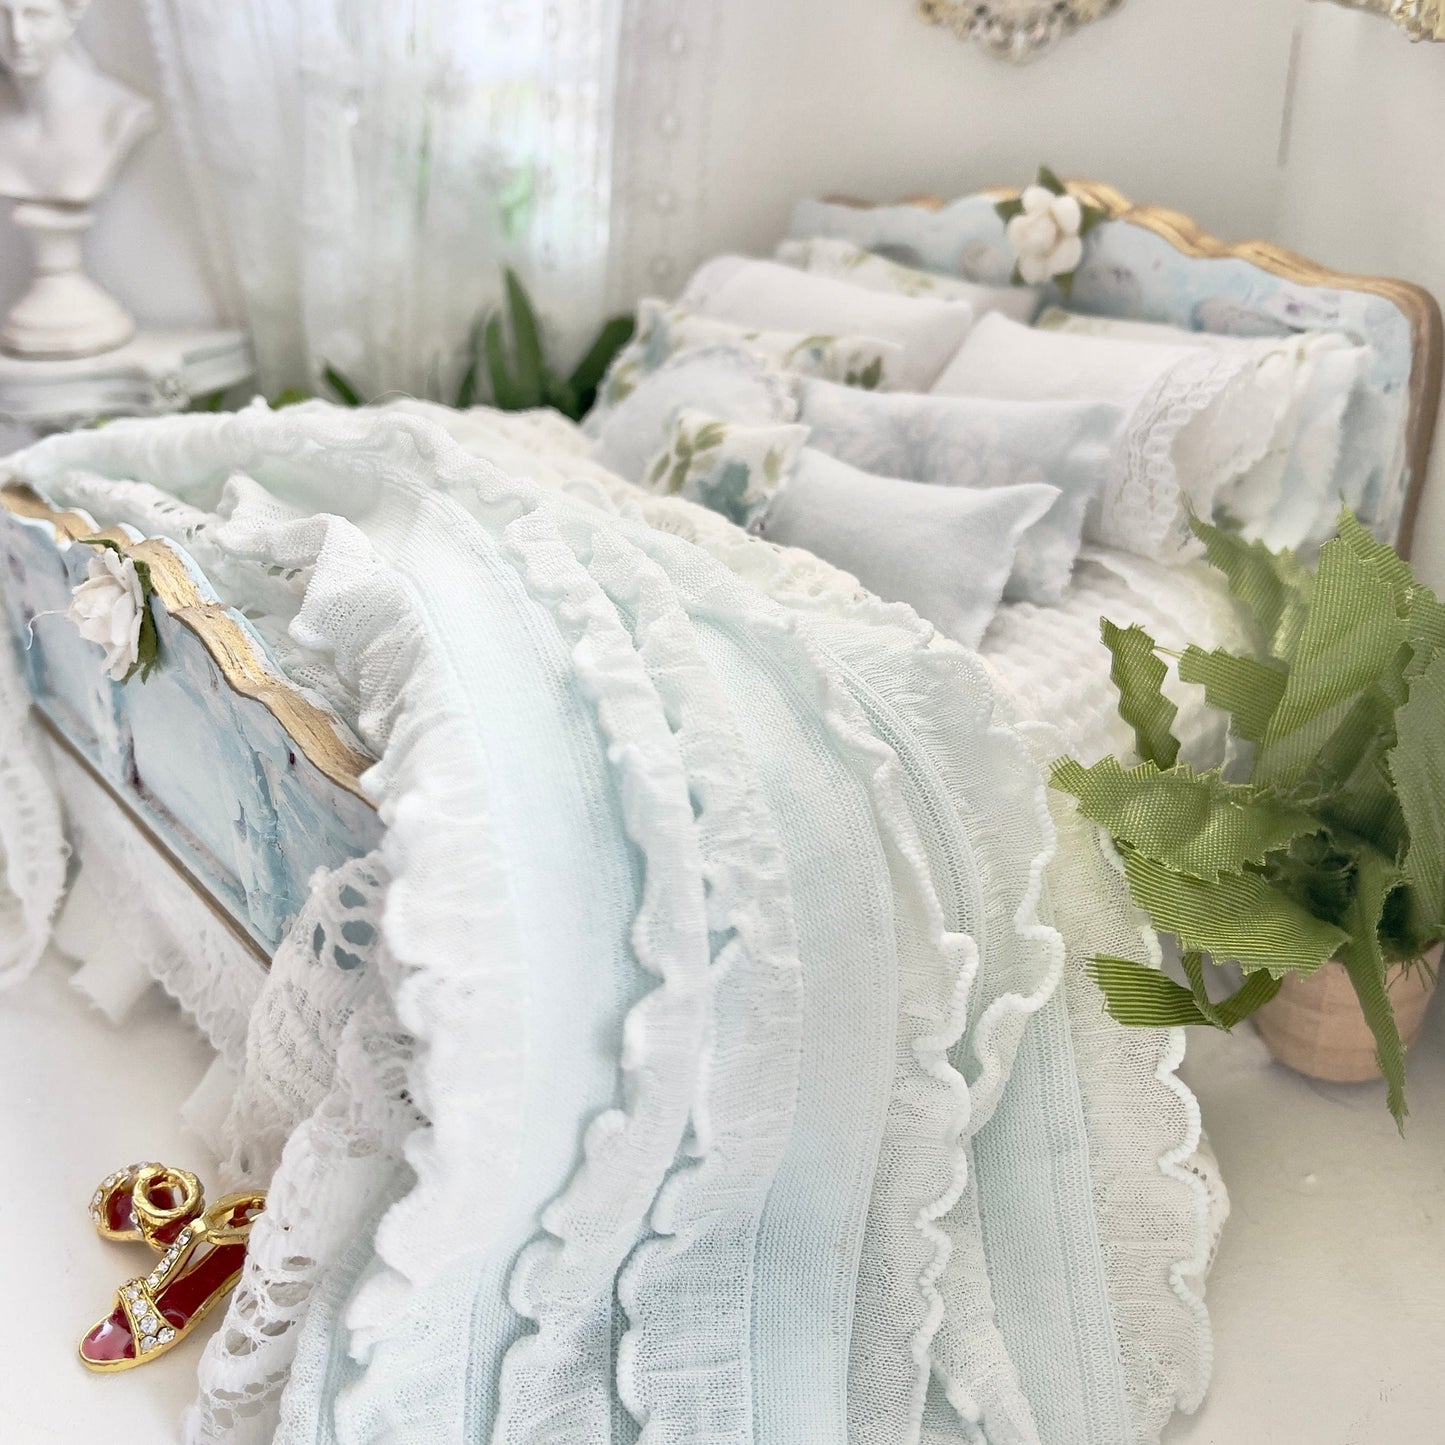 Chantallena Doll House Dressed Bed |  White Shabby Cotton with Pale Blue Ruffled Throw, Lace Throw and Assorted Pillows | Jeremy